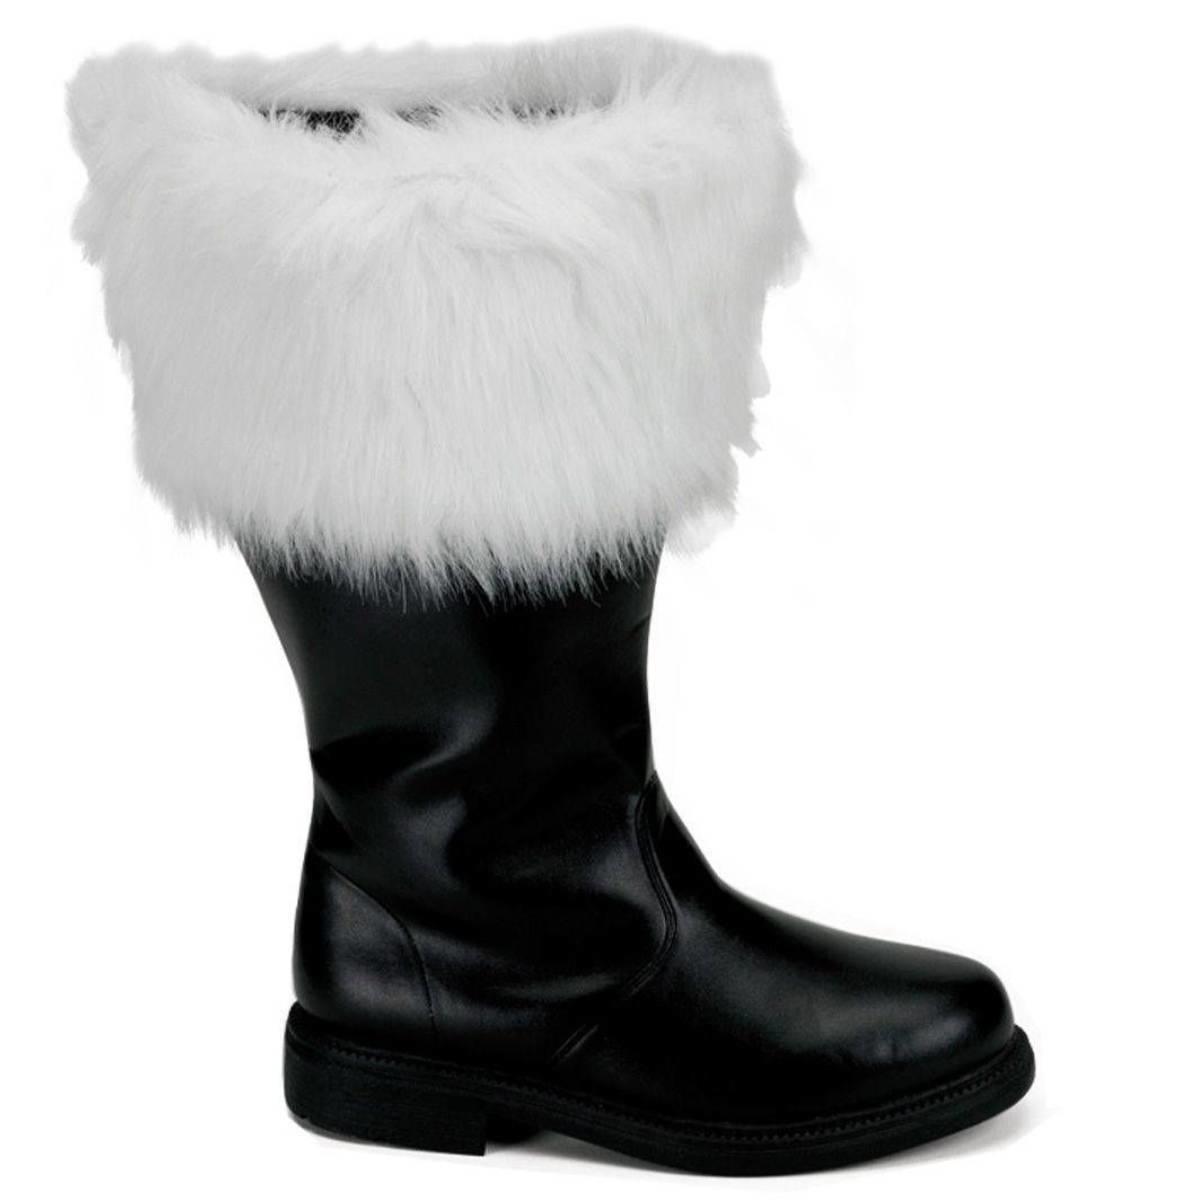 Deluxe Santa Boots. Wide Cuff Father Christmas Boots by Funtasma TA-106WC from a collection of footwear at Karnival Costumes your Christmas specialists